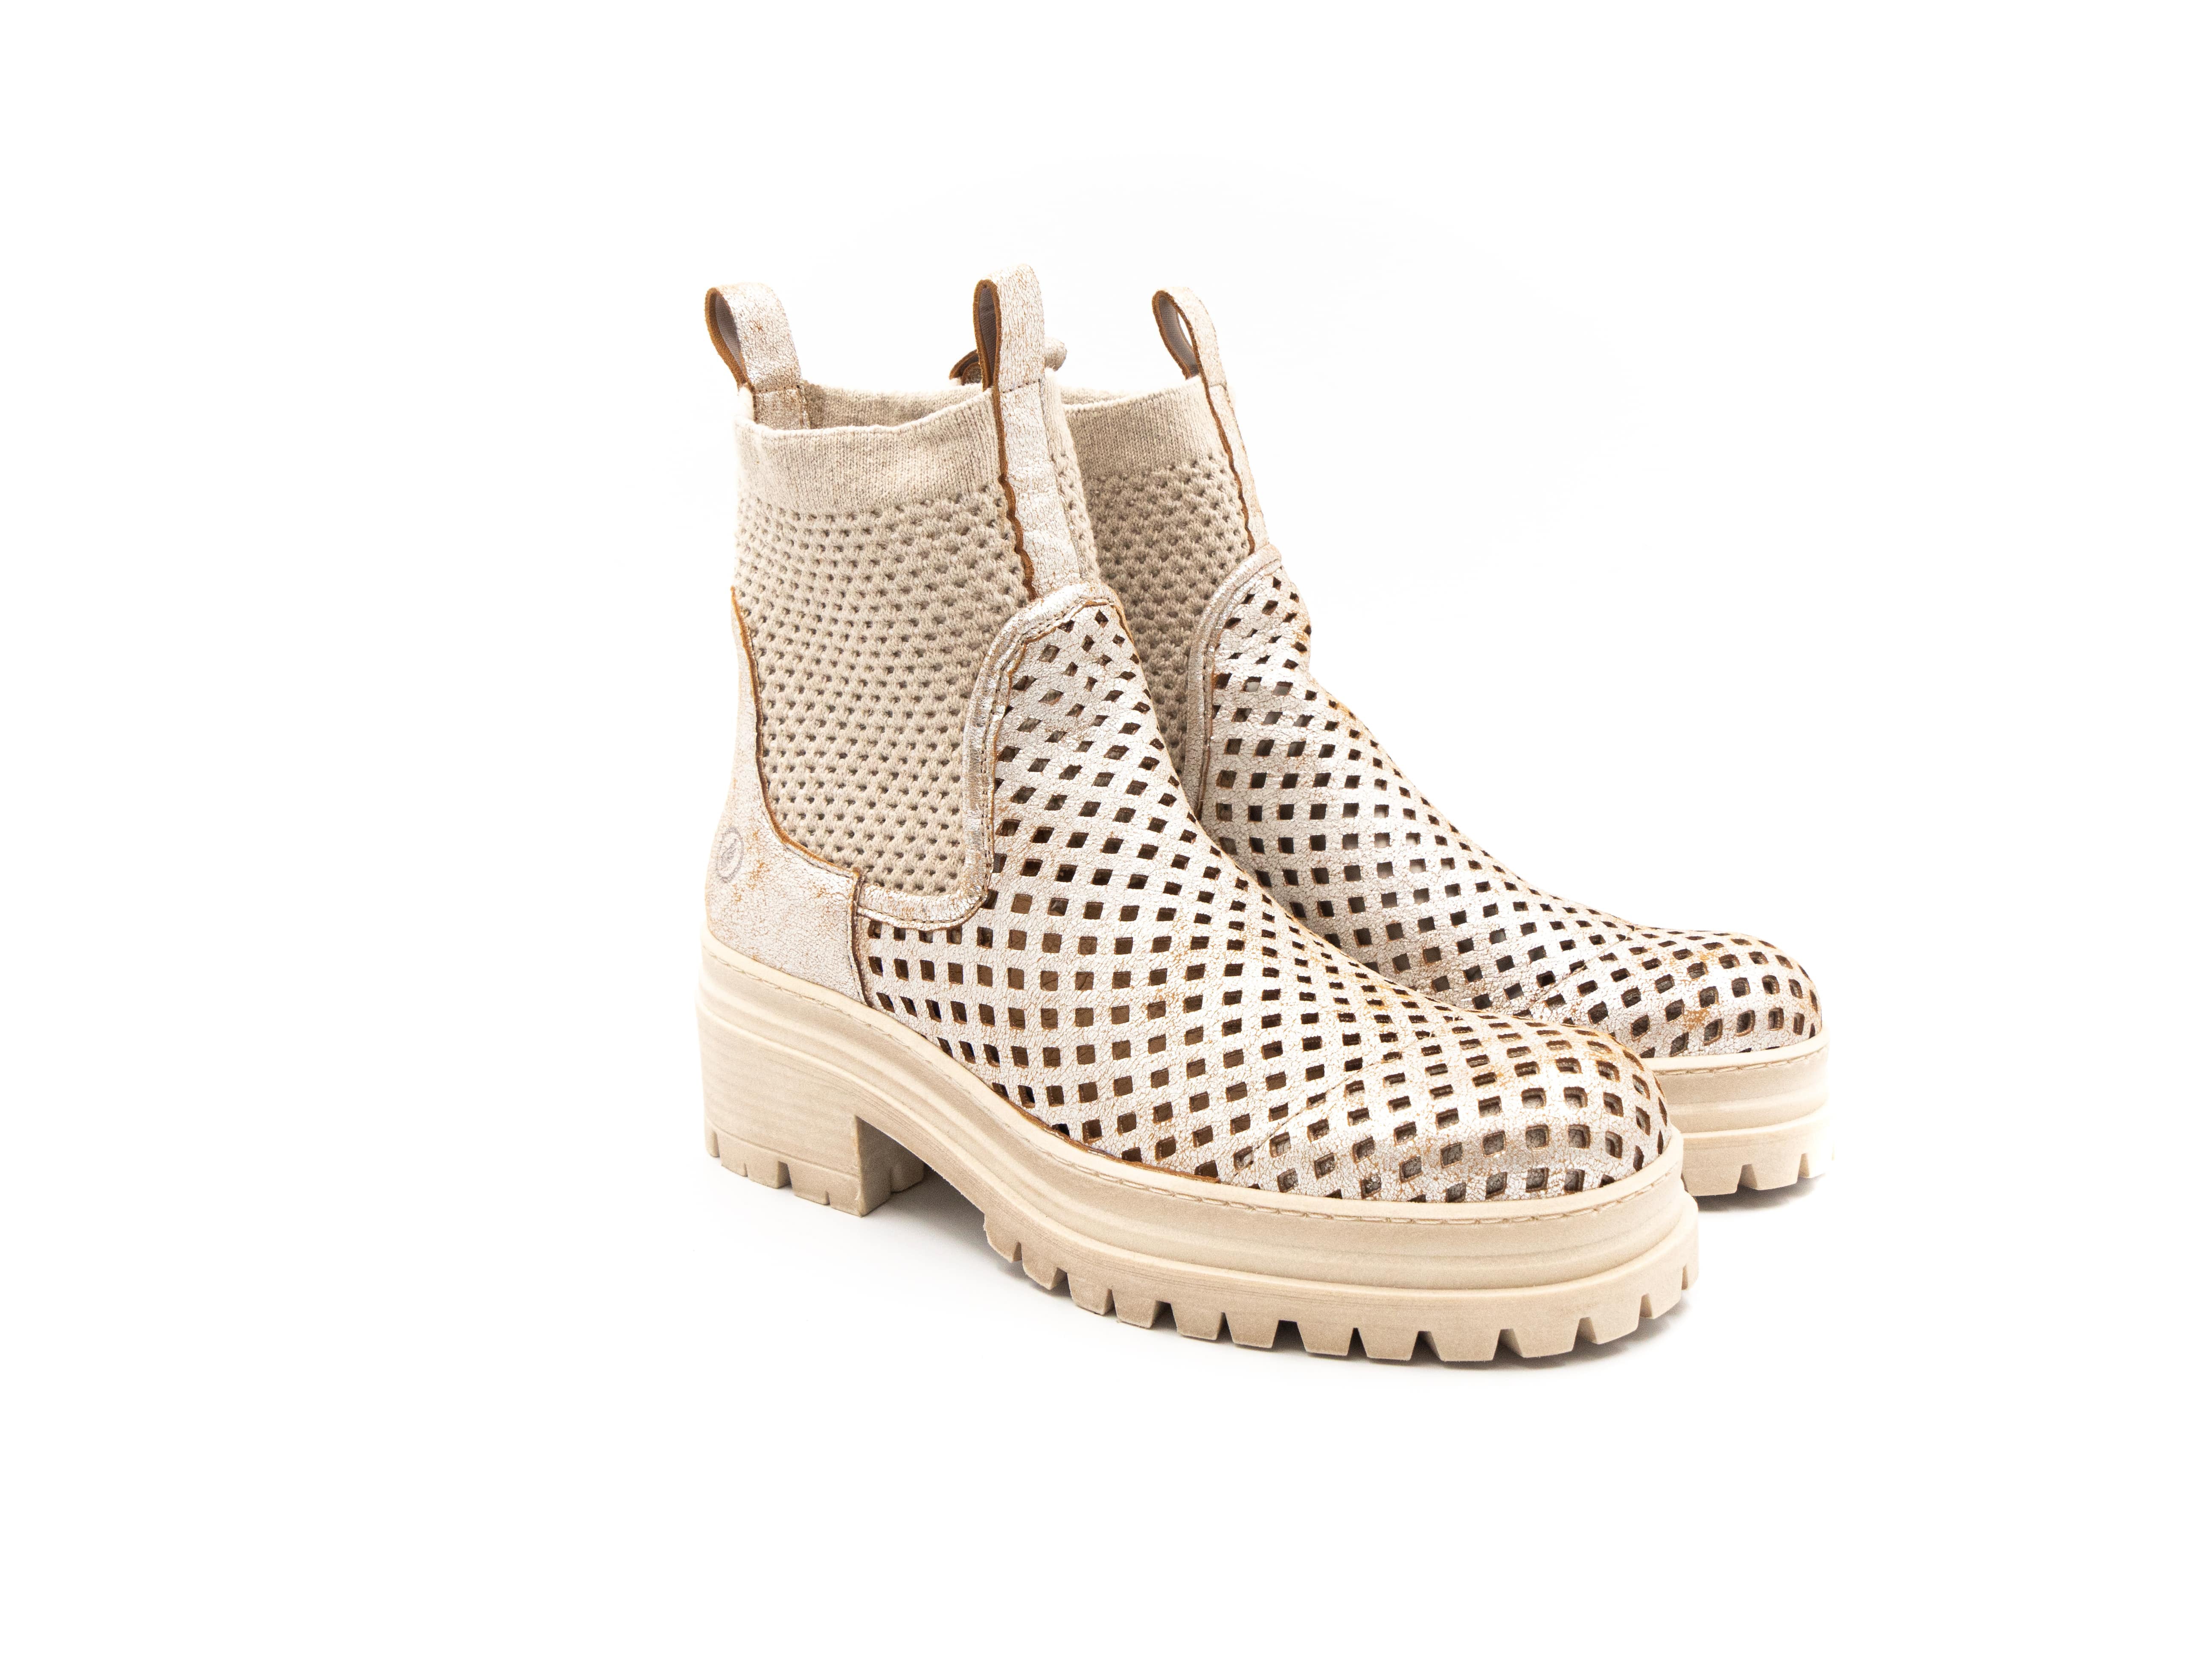 Perforated summer boots.